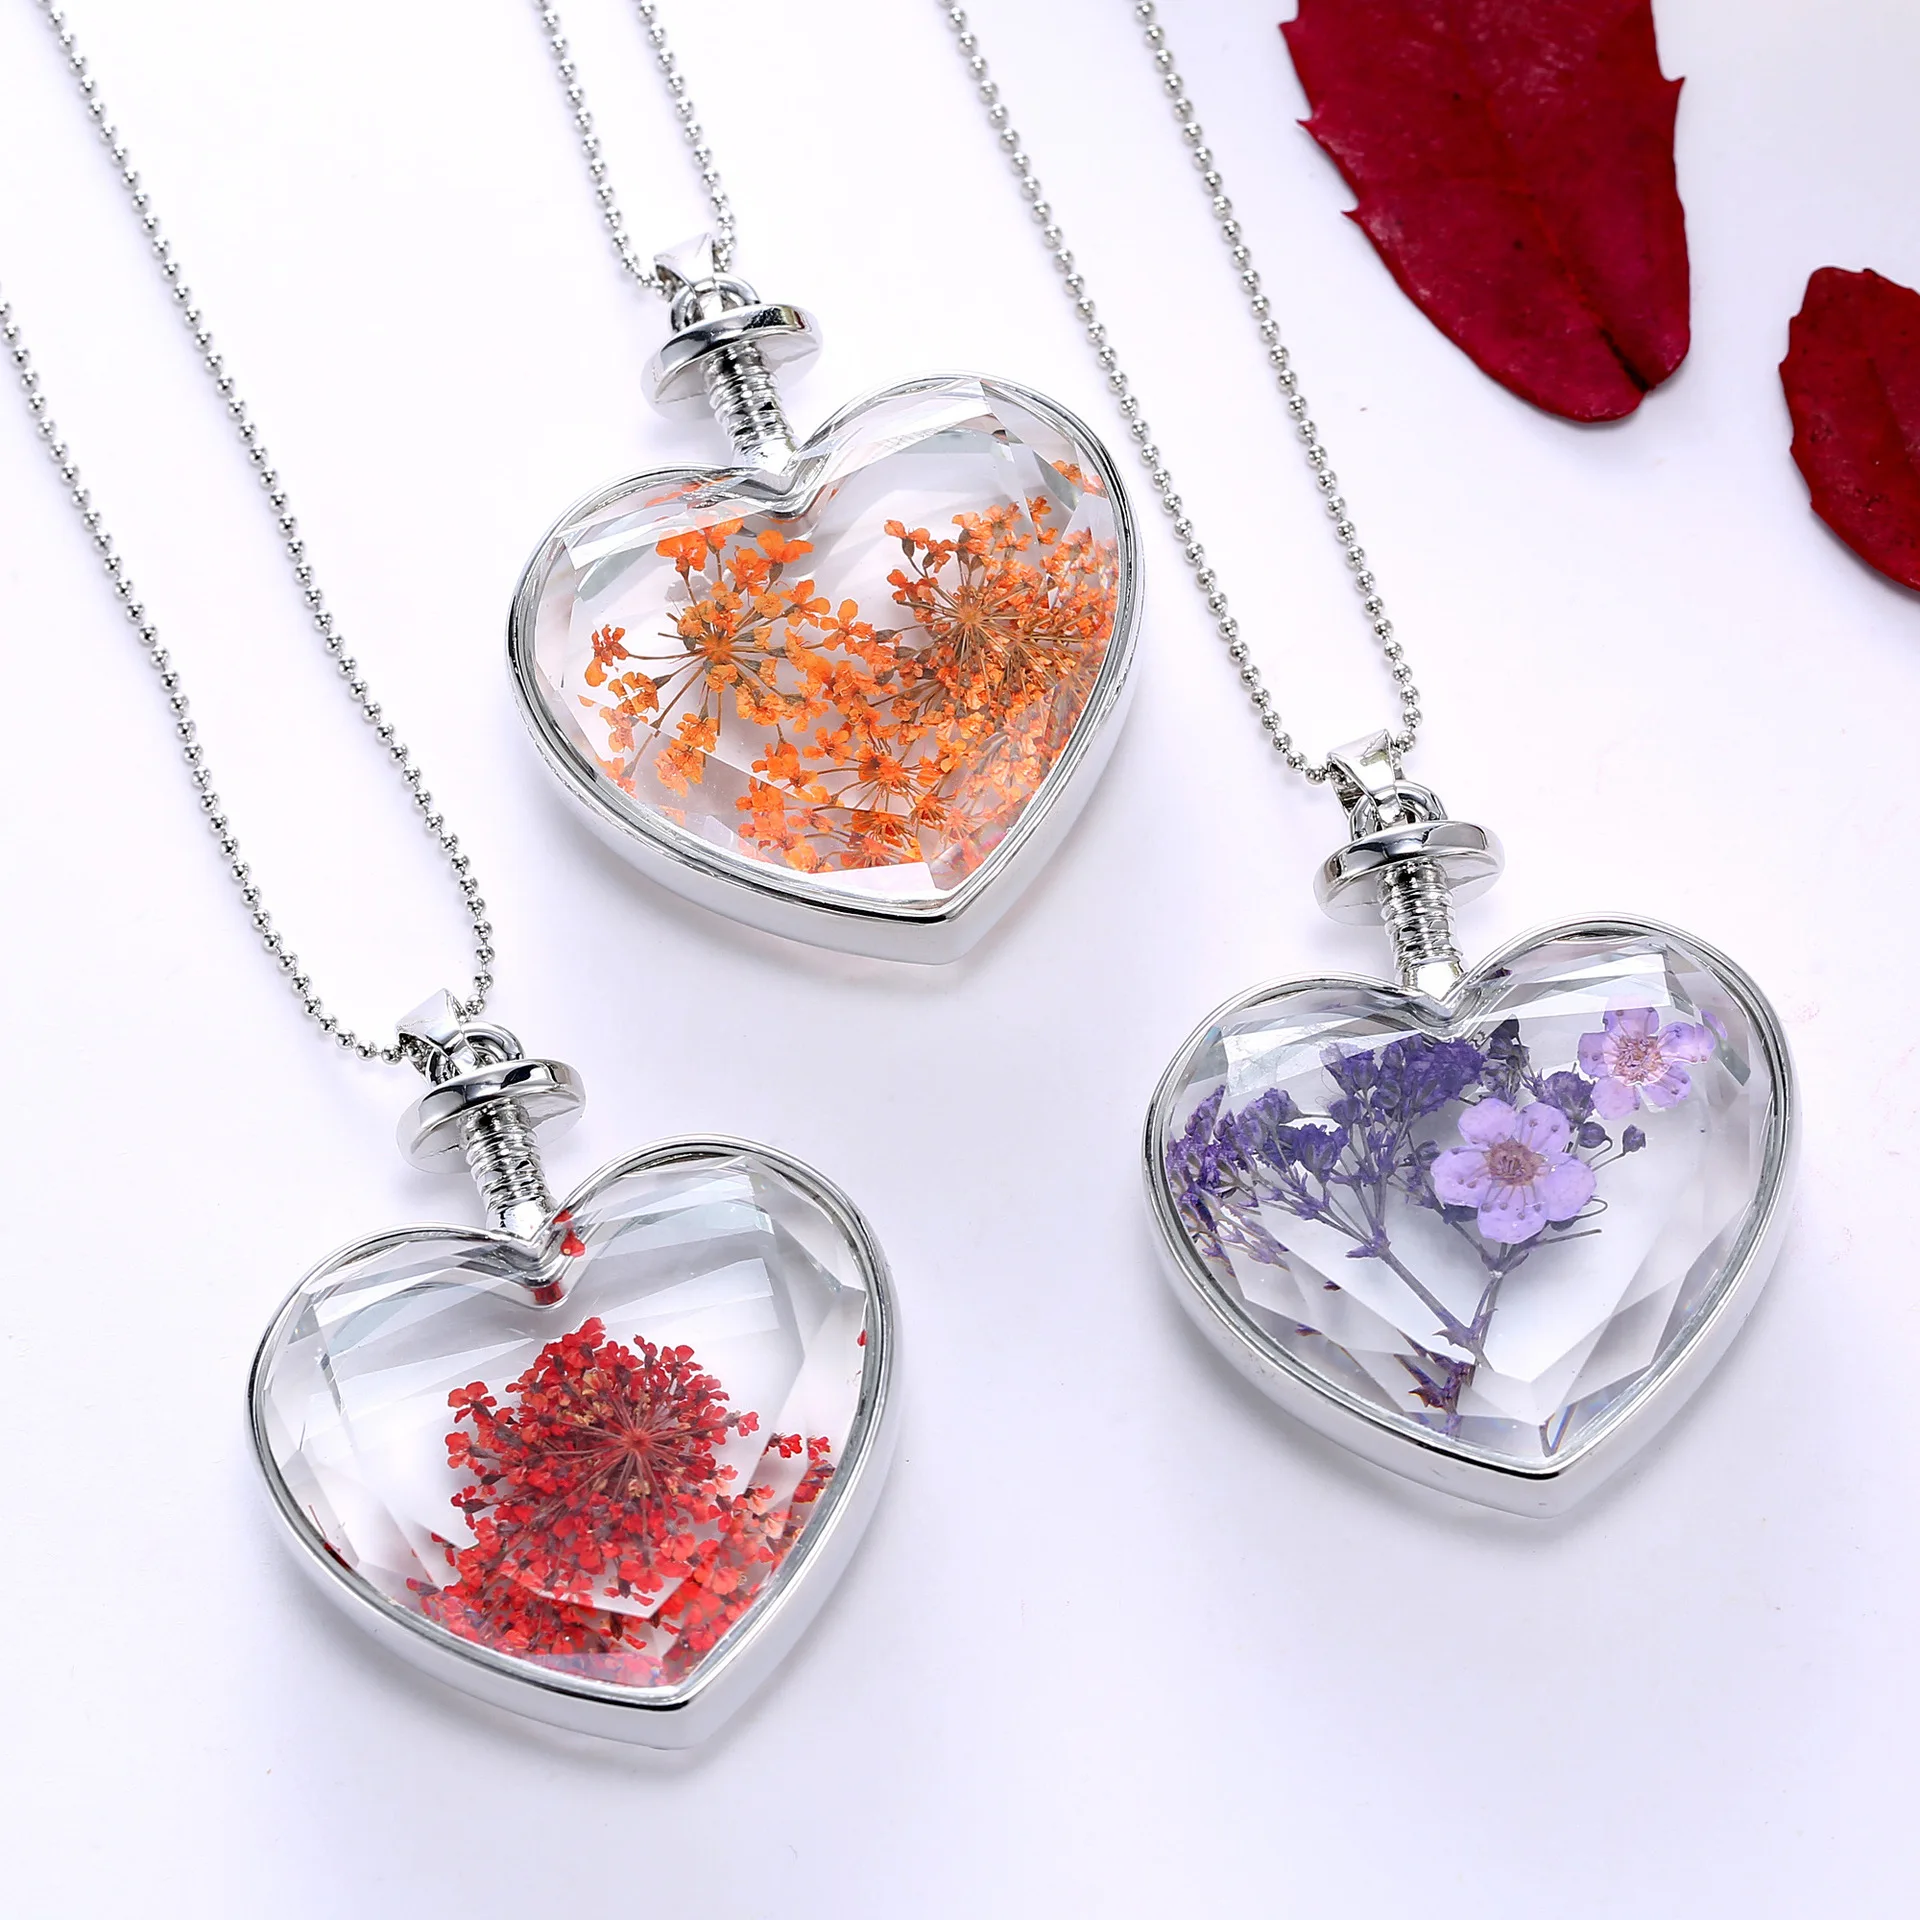 

Amazon Best Selling Heart Shape Glass Pressed Necklace Pendant Gift Dried Flower Jewelry, More colors